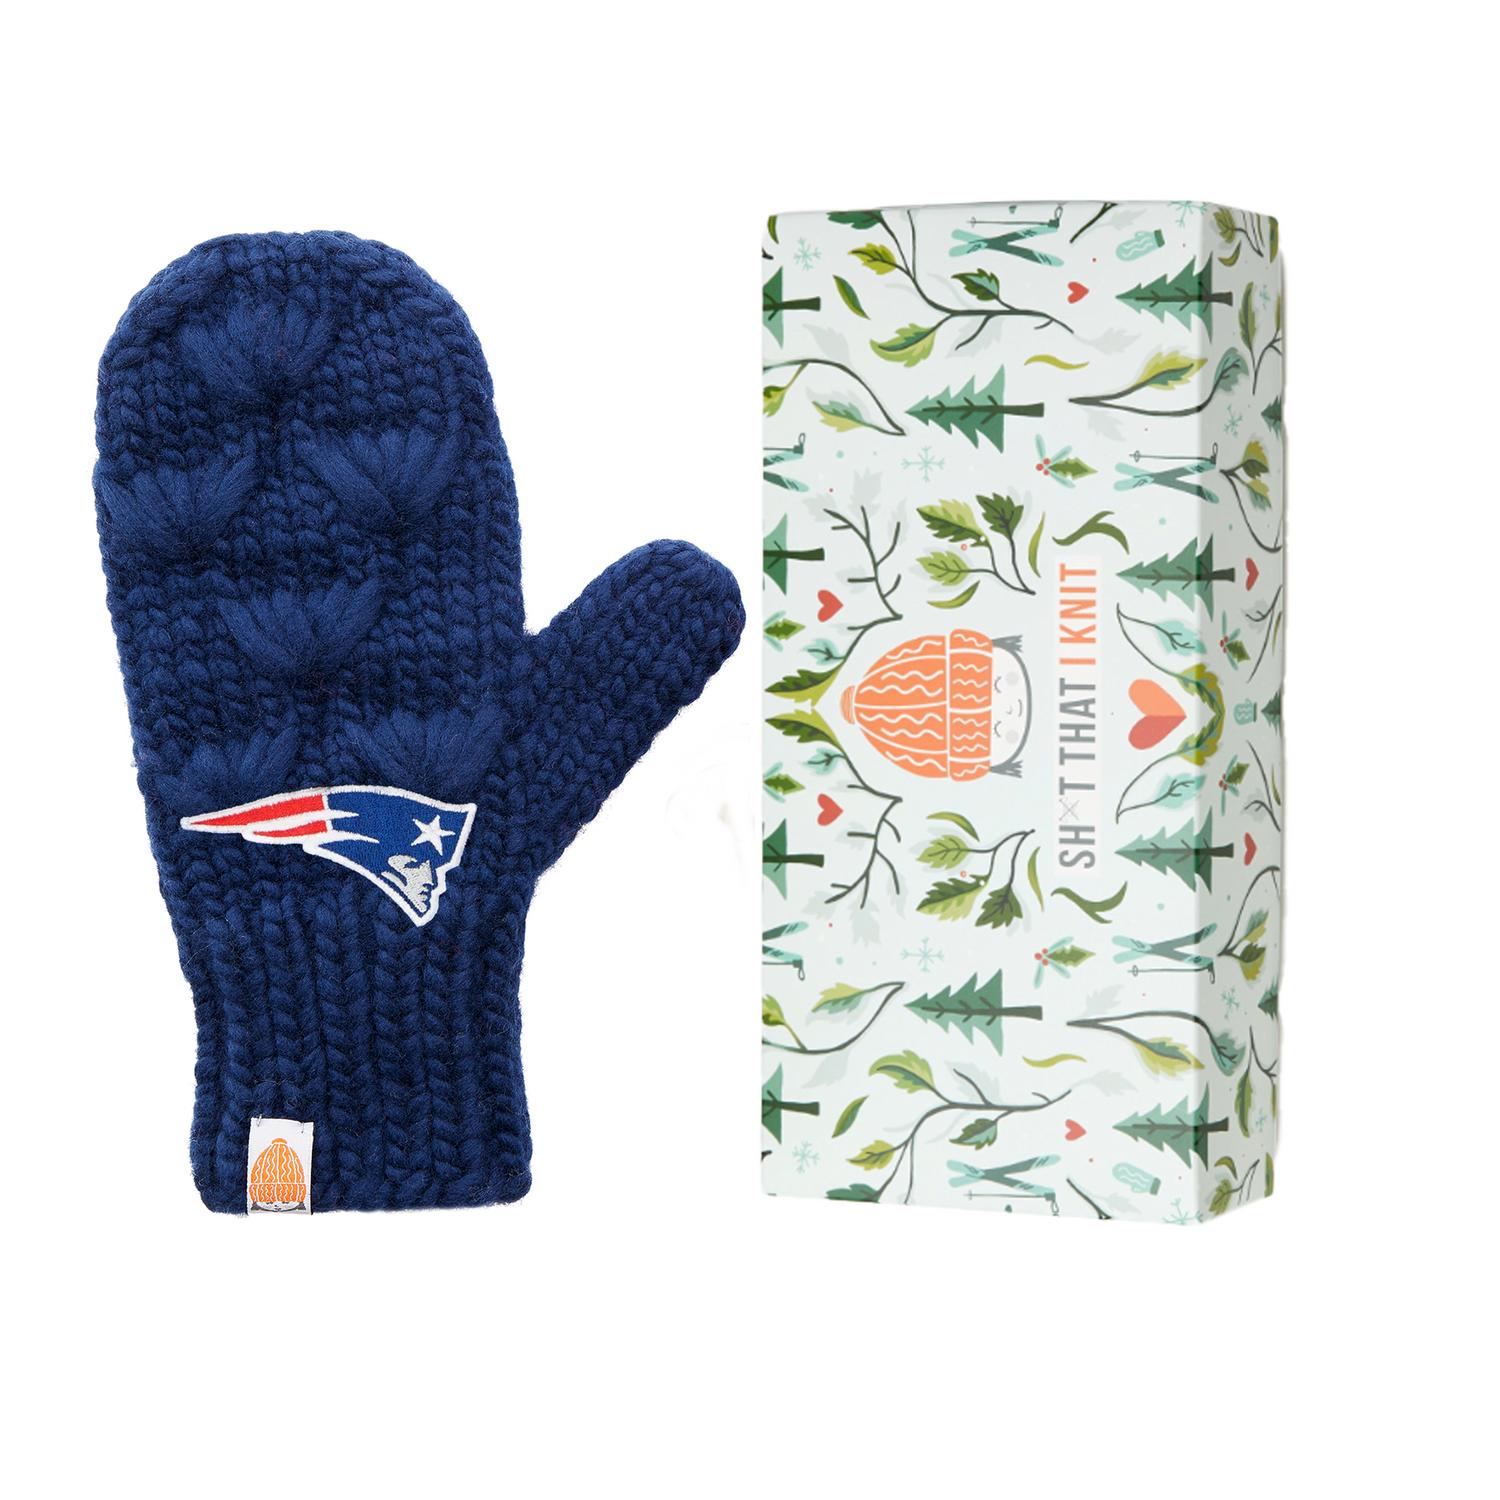 The Pats NFL Mitten Gift Set